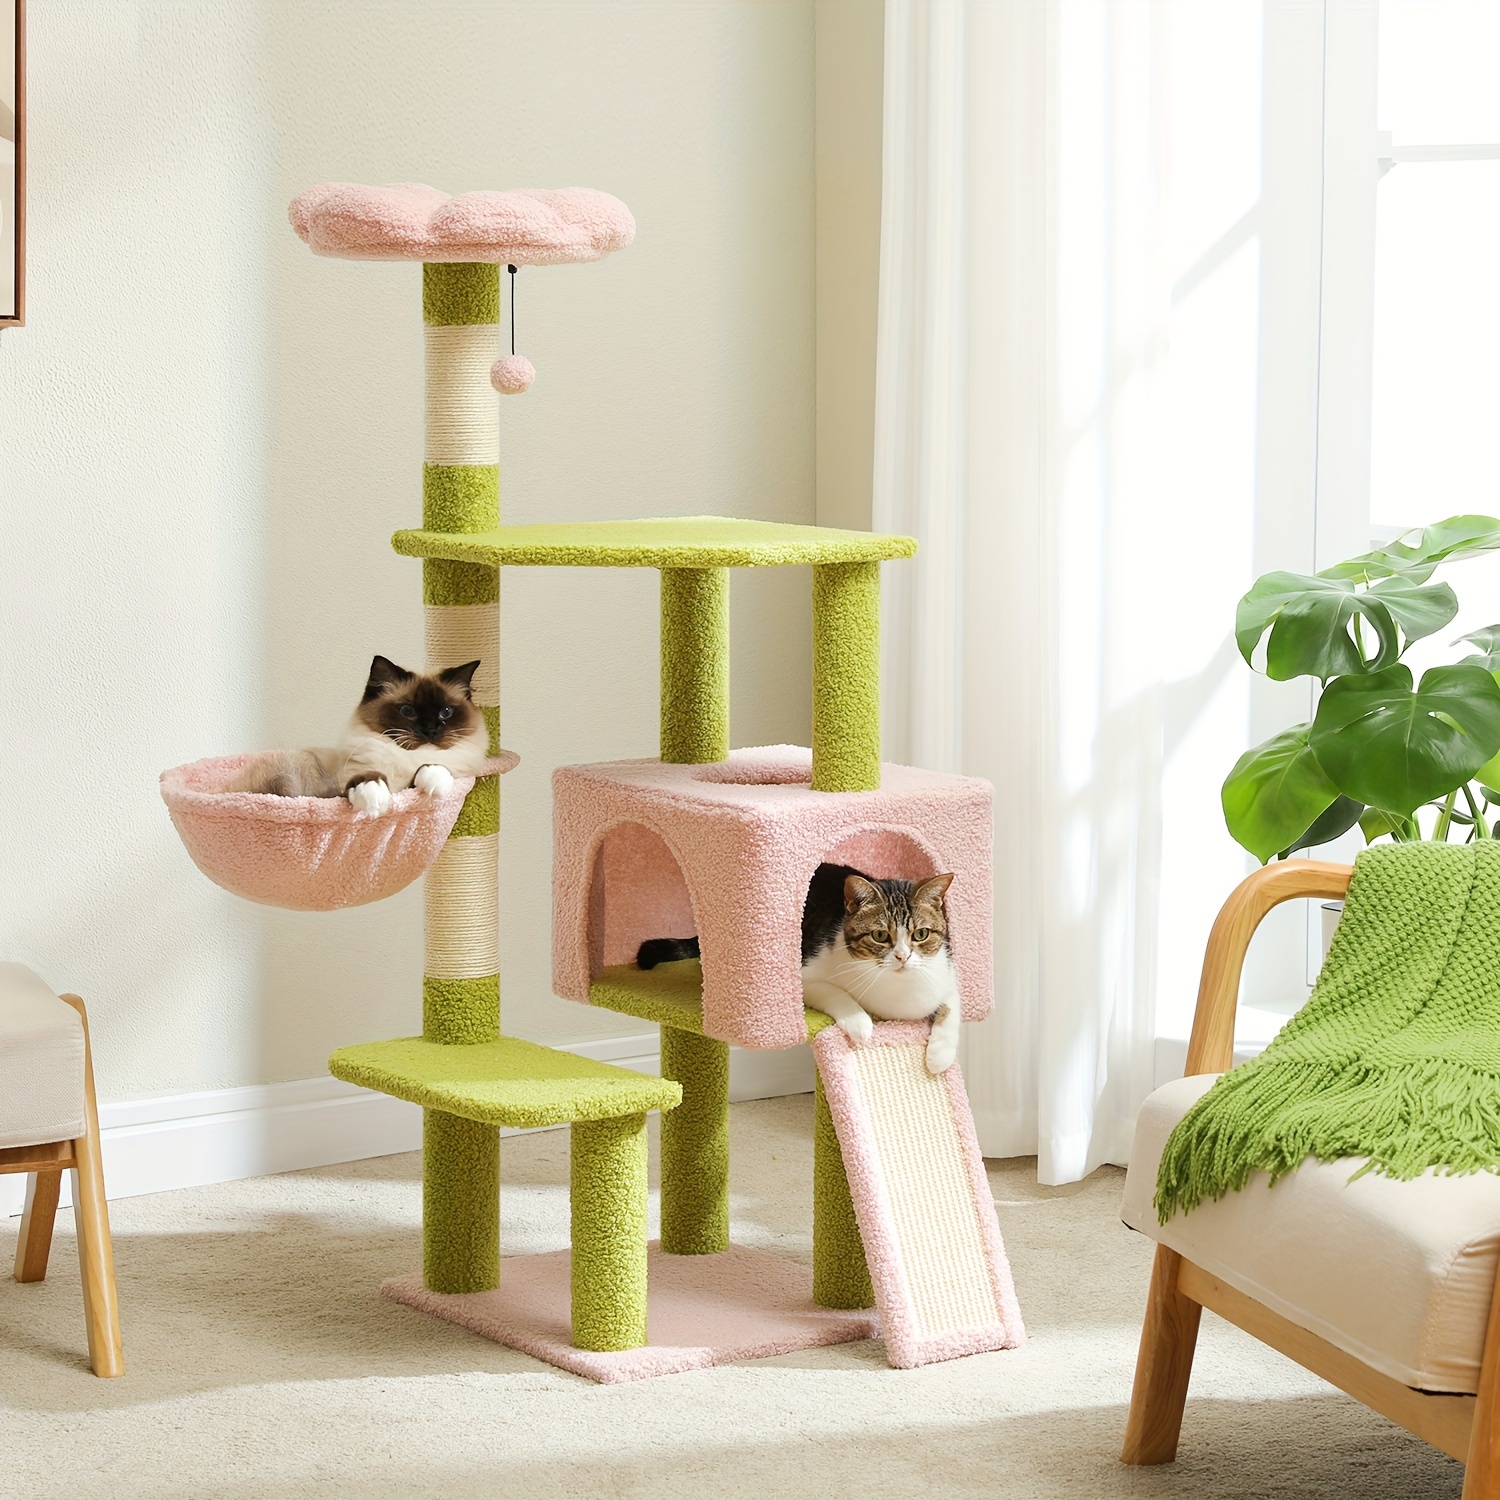 

Flower Cat Tree 47.2" Multi-level Cat Tower With Sisal Covered Scratching Posts, Cute Cat Condo For Indoor Small Medium Cats, Pink Top Perch, Ramp, Fluffy Ball